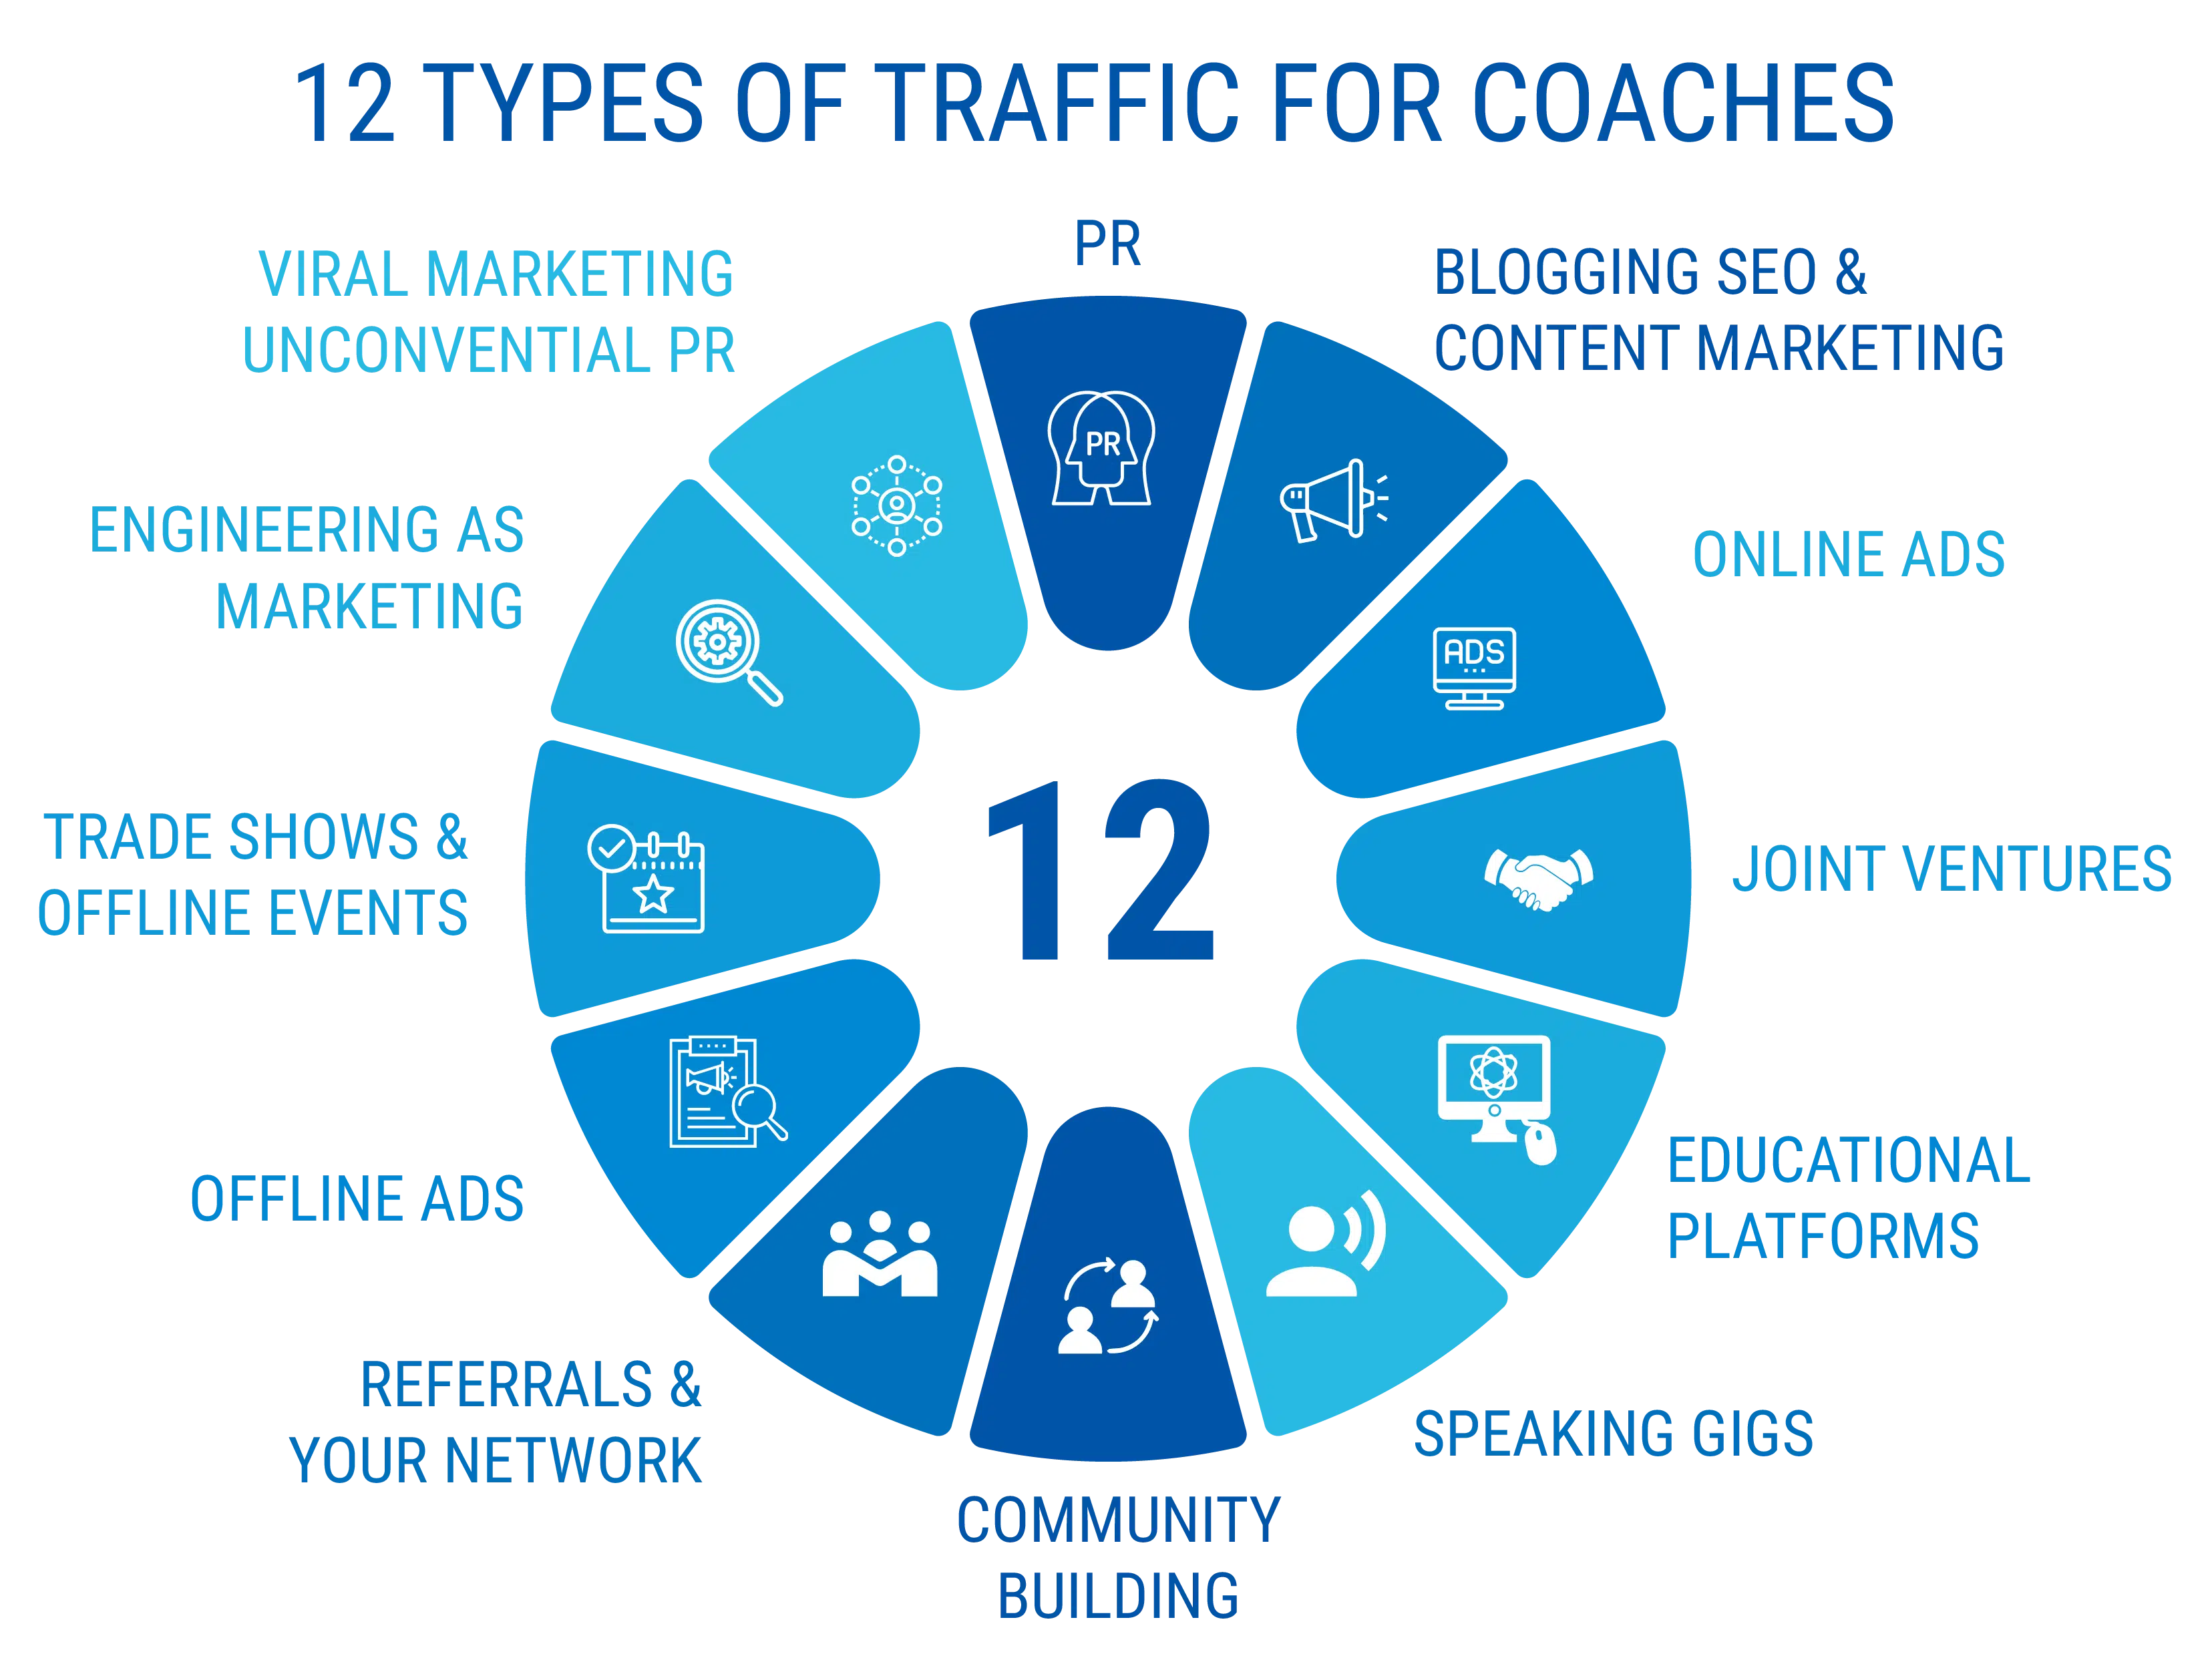 12 types of traffic for coaches - starting a coaching business while working full-time